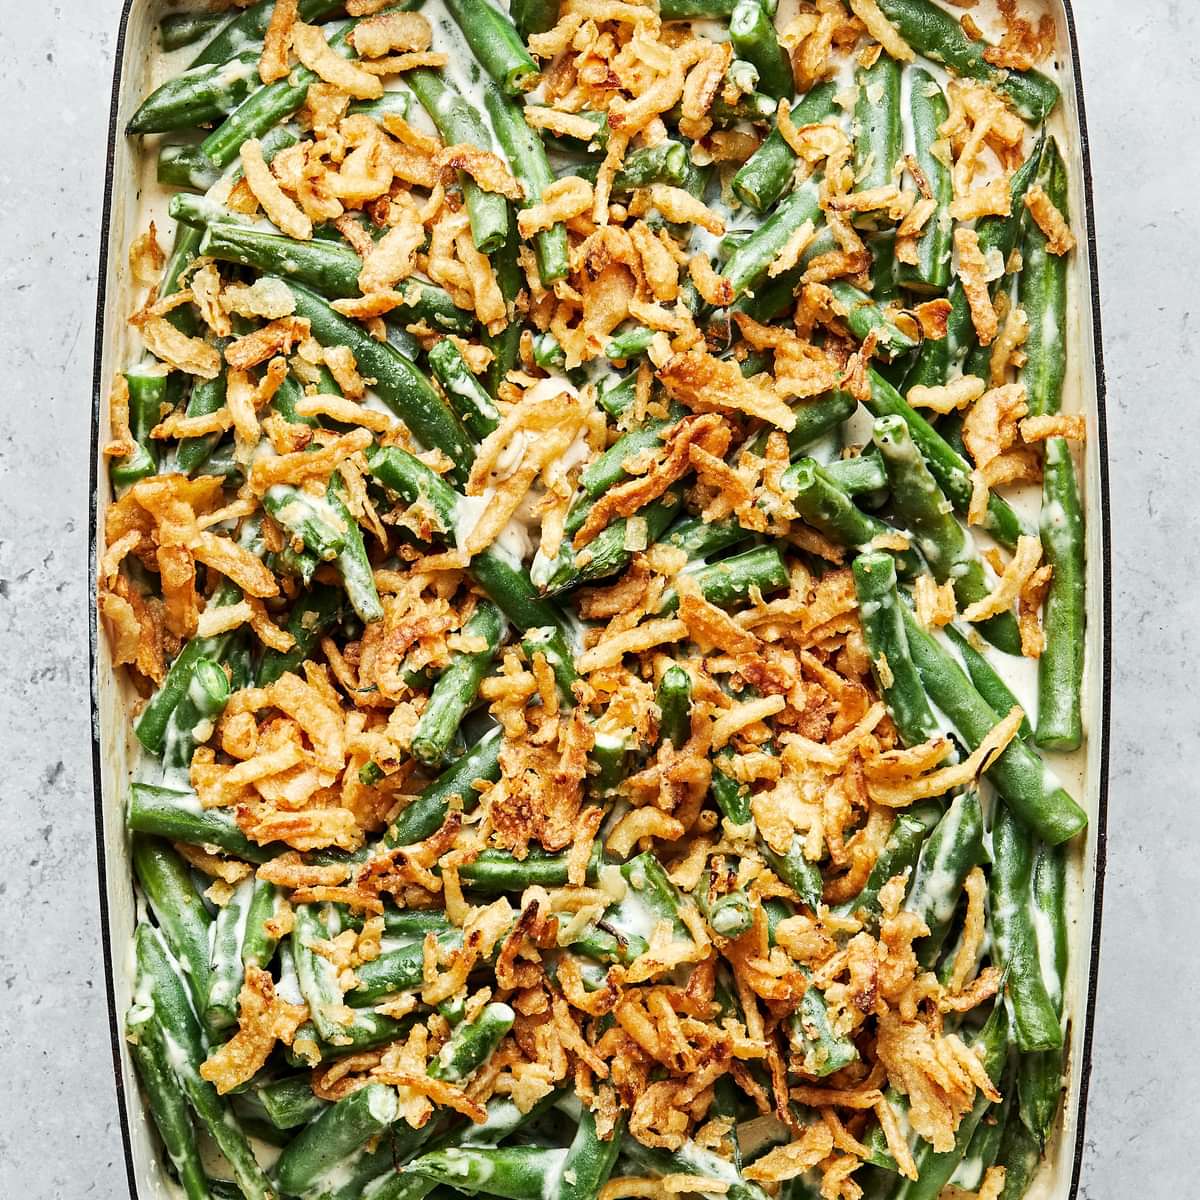 homemade green bean casserole with a creamy sauce, topped with French fried onions in a casserole dish